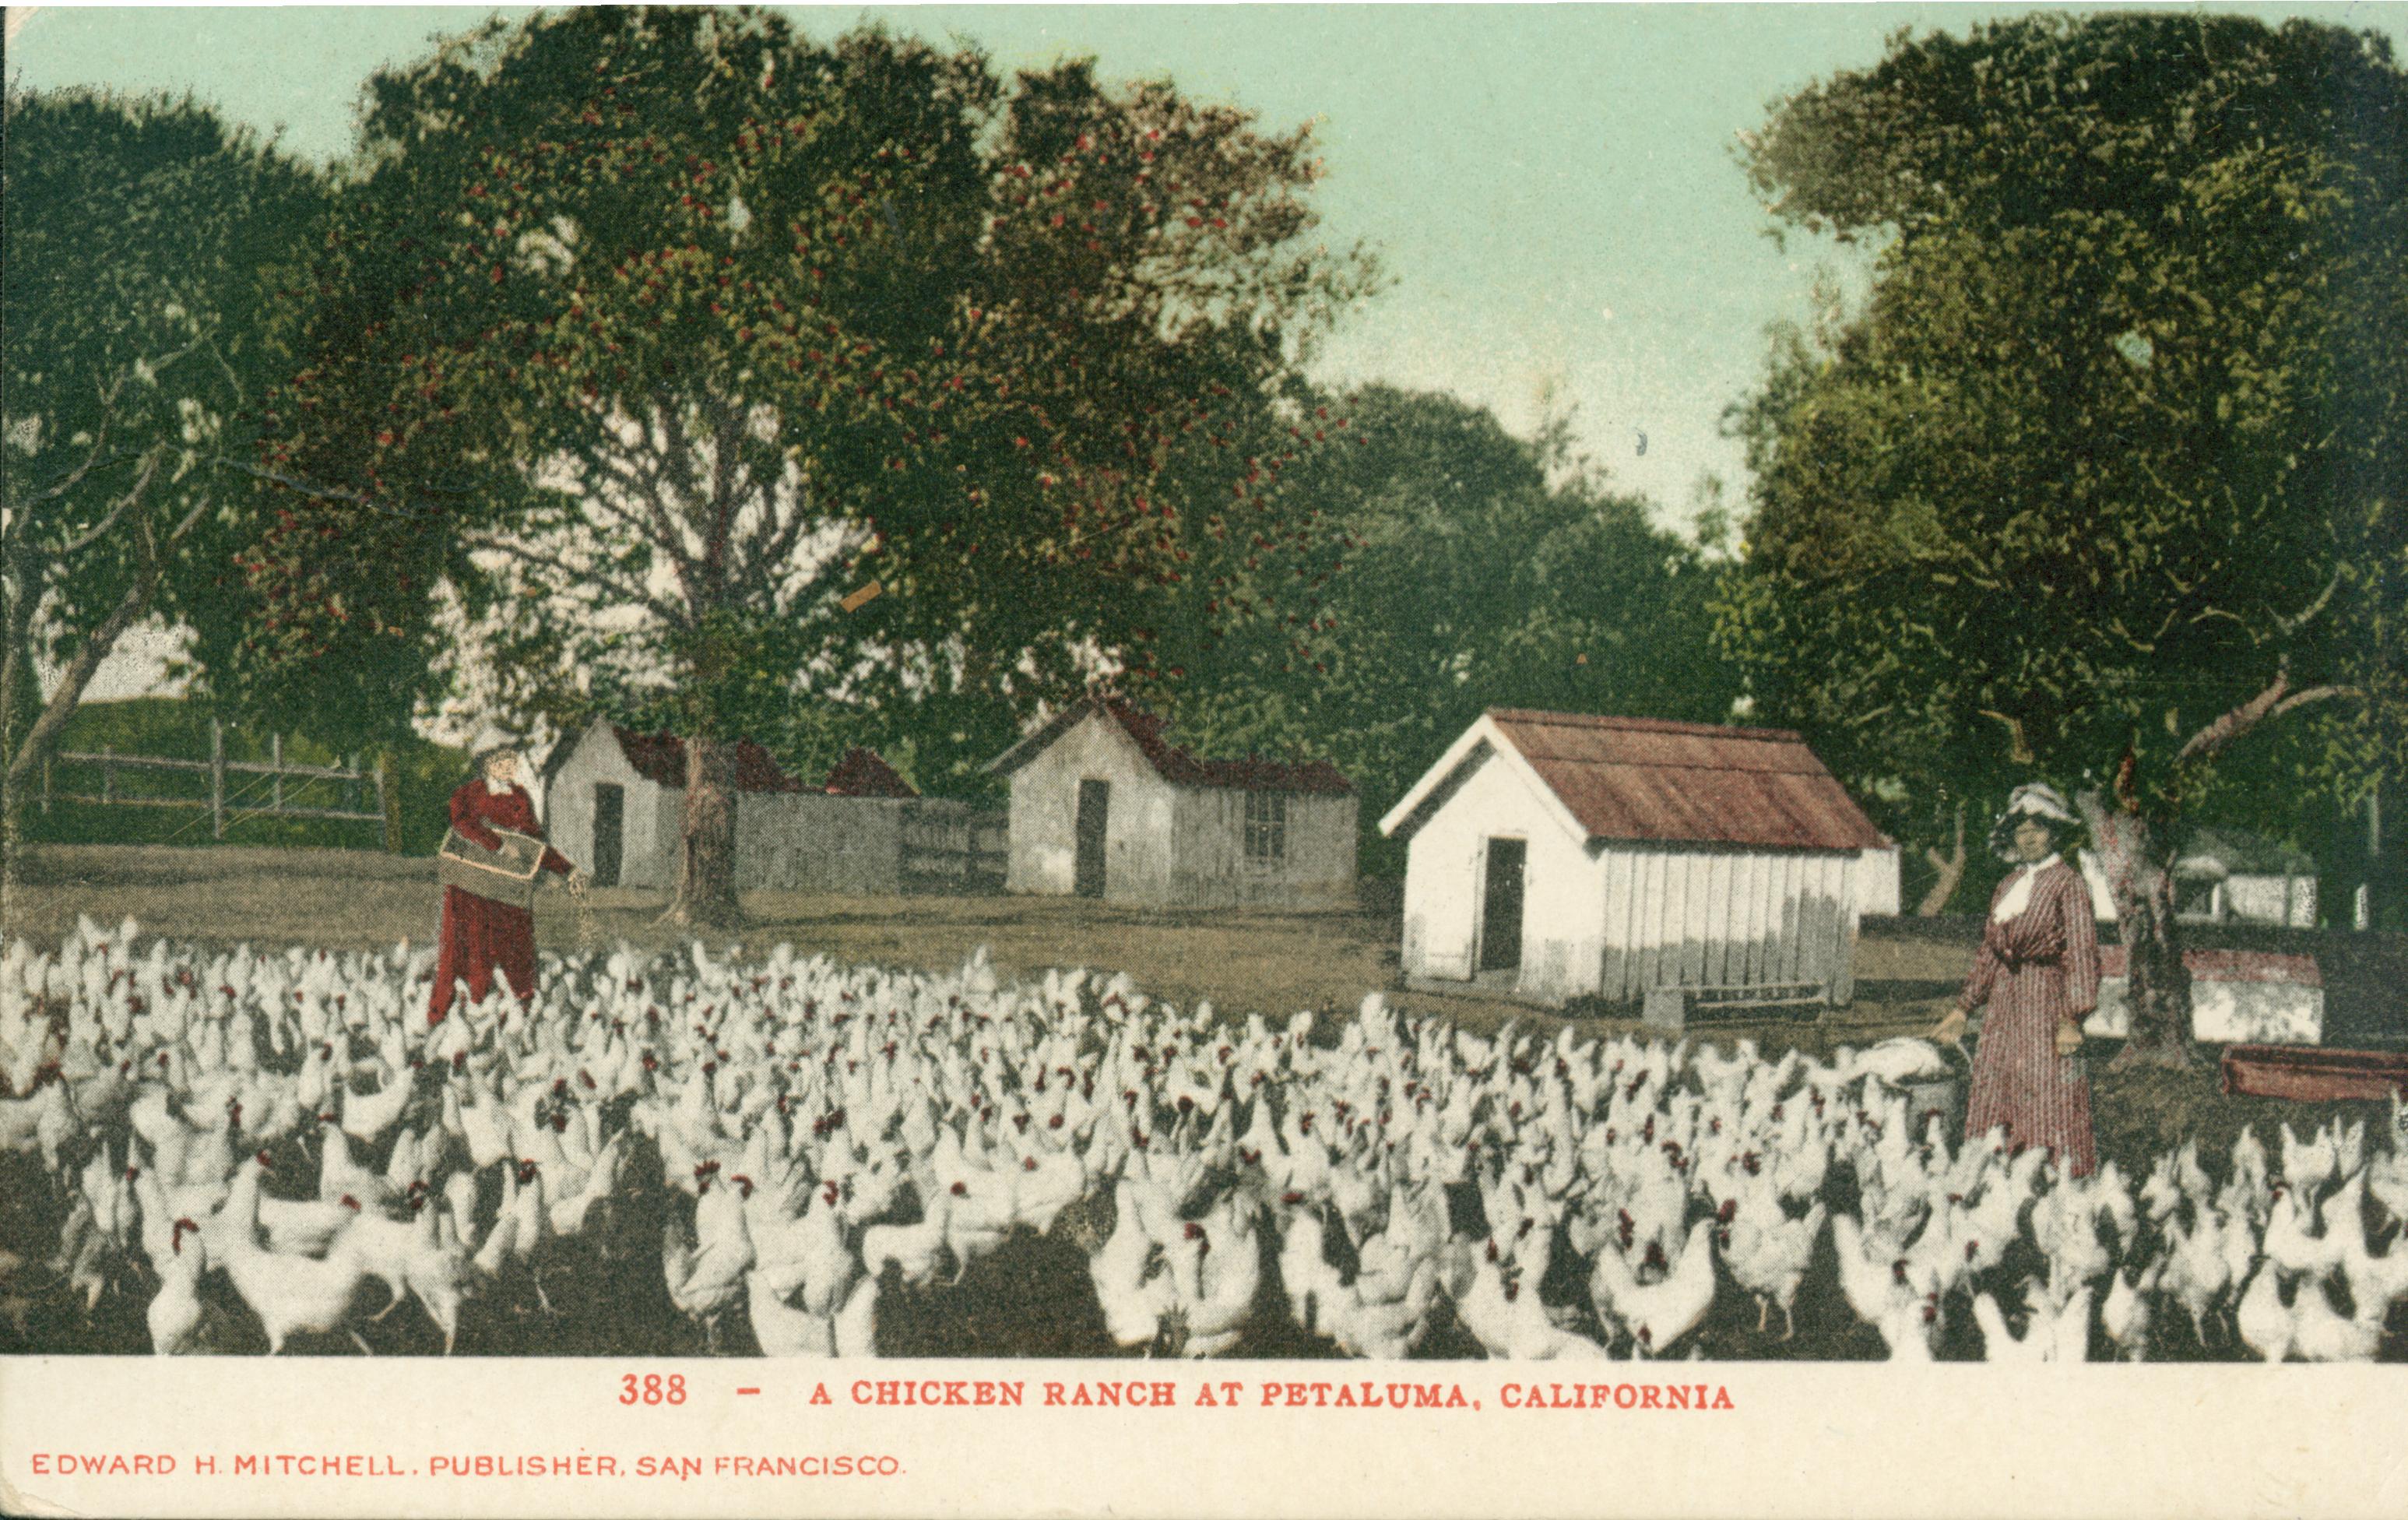 Shows a flock of chickens with two women tending them and several buildings in the background